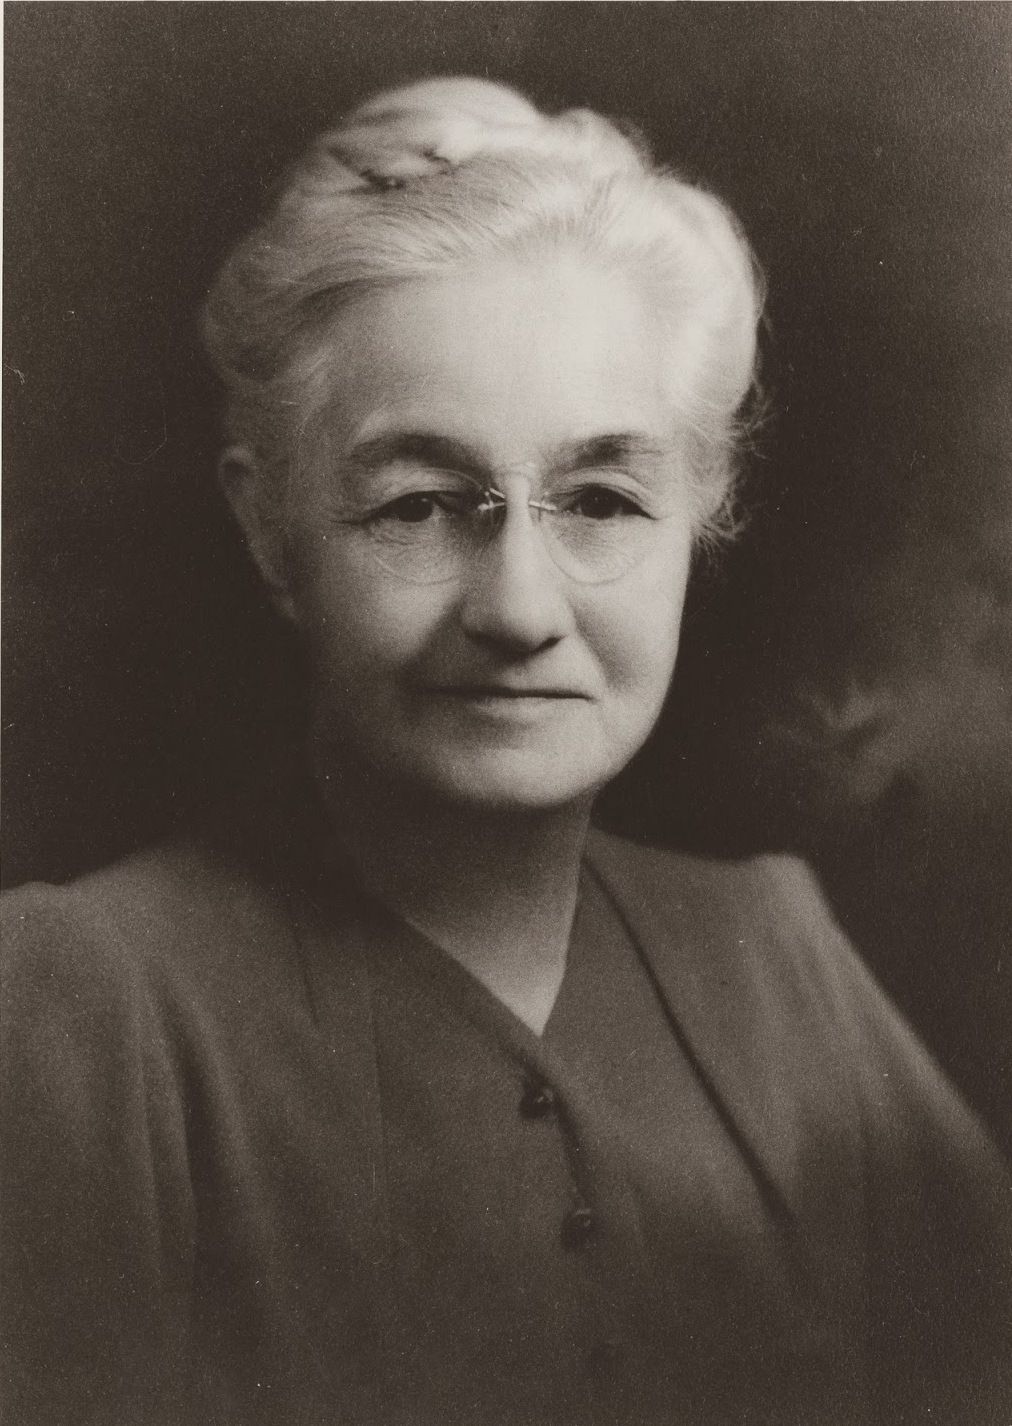 An older women is shown in a traditional portrait style. Her hair is white and up in a bun. She is also wearing glasses.